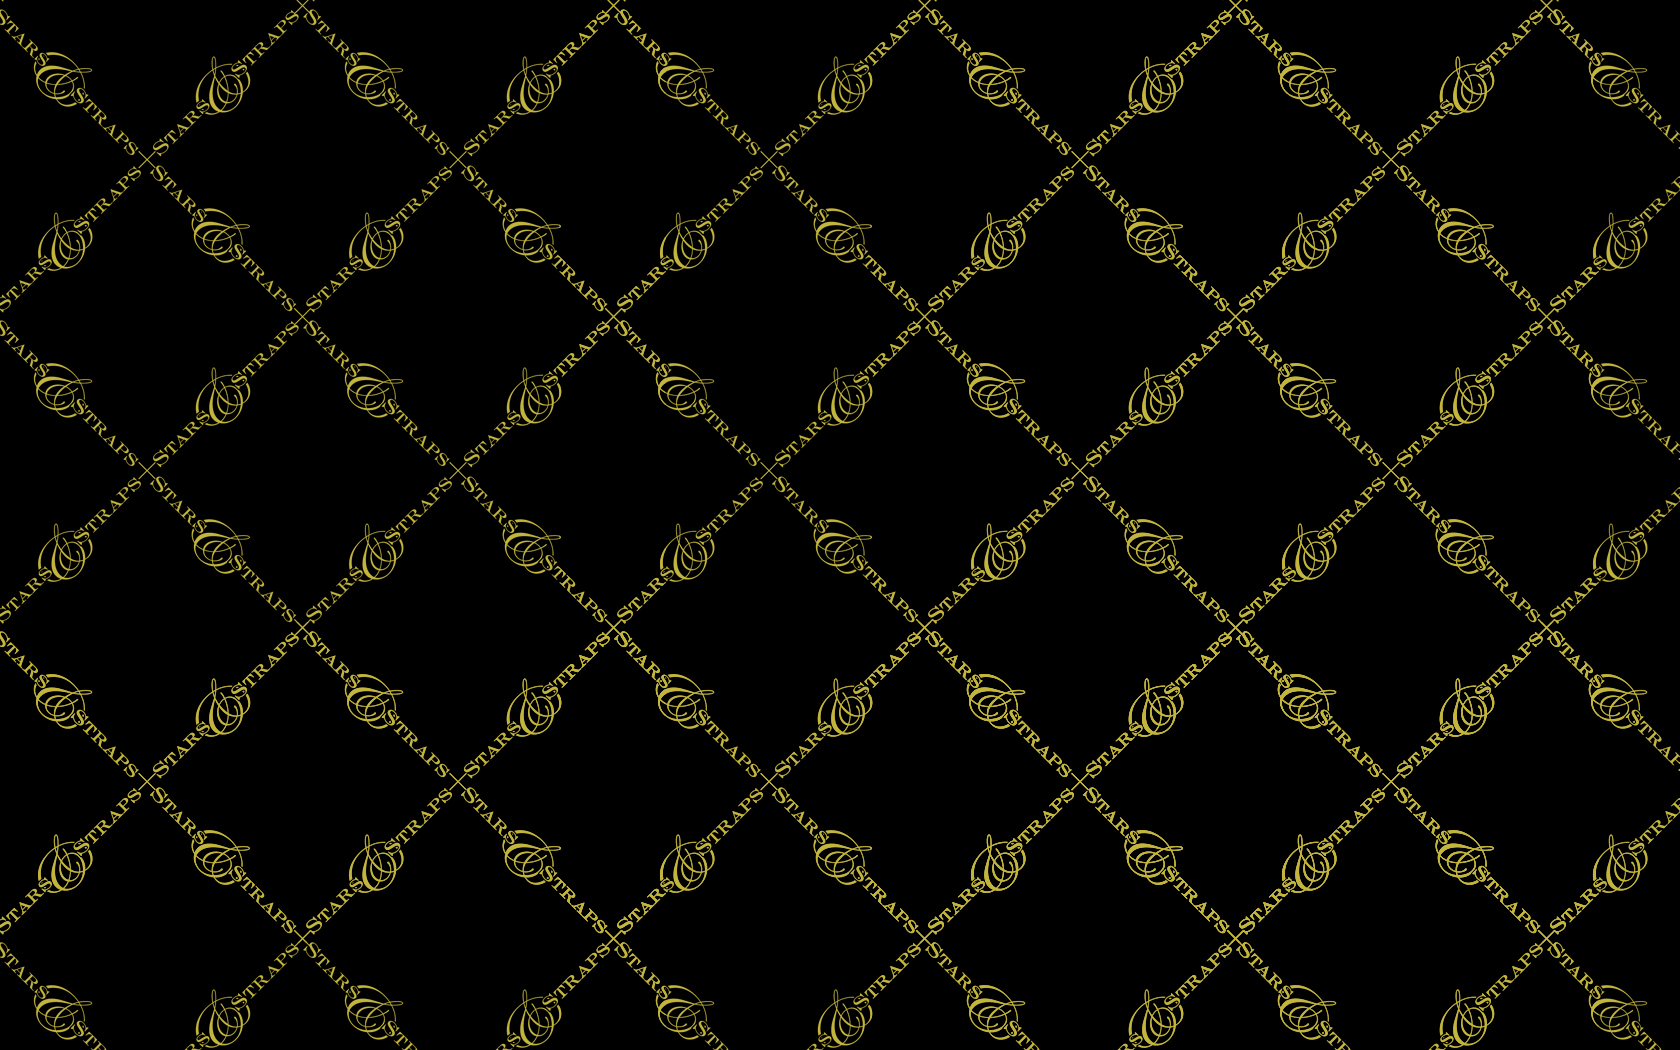  gold and black famous logo wallpapers free gold and black famous 1680x1050